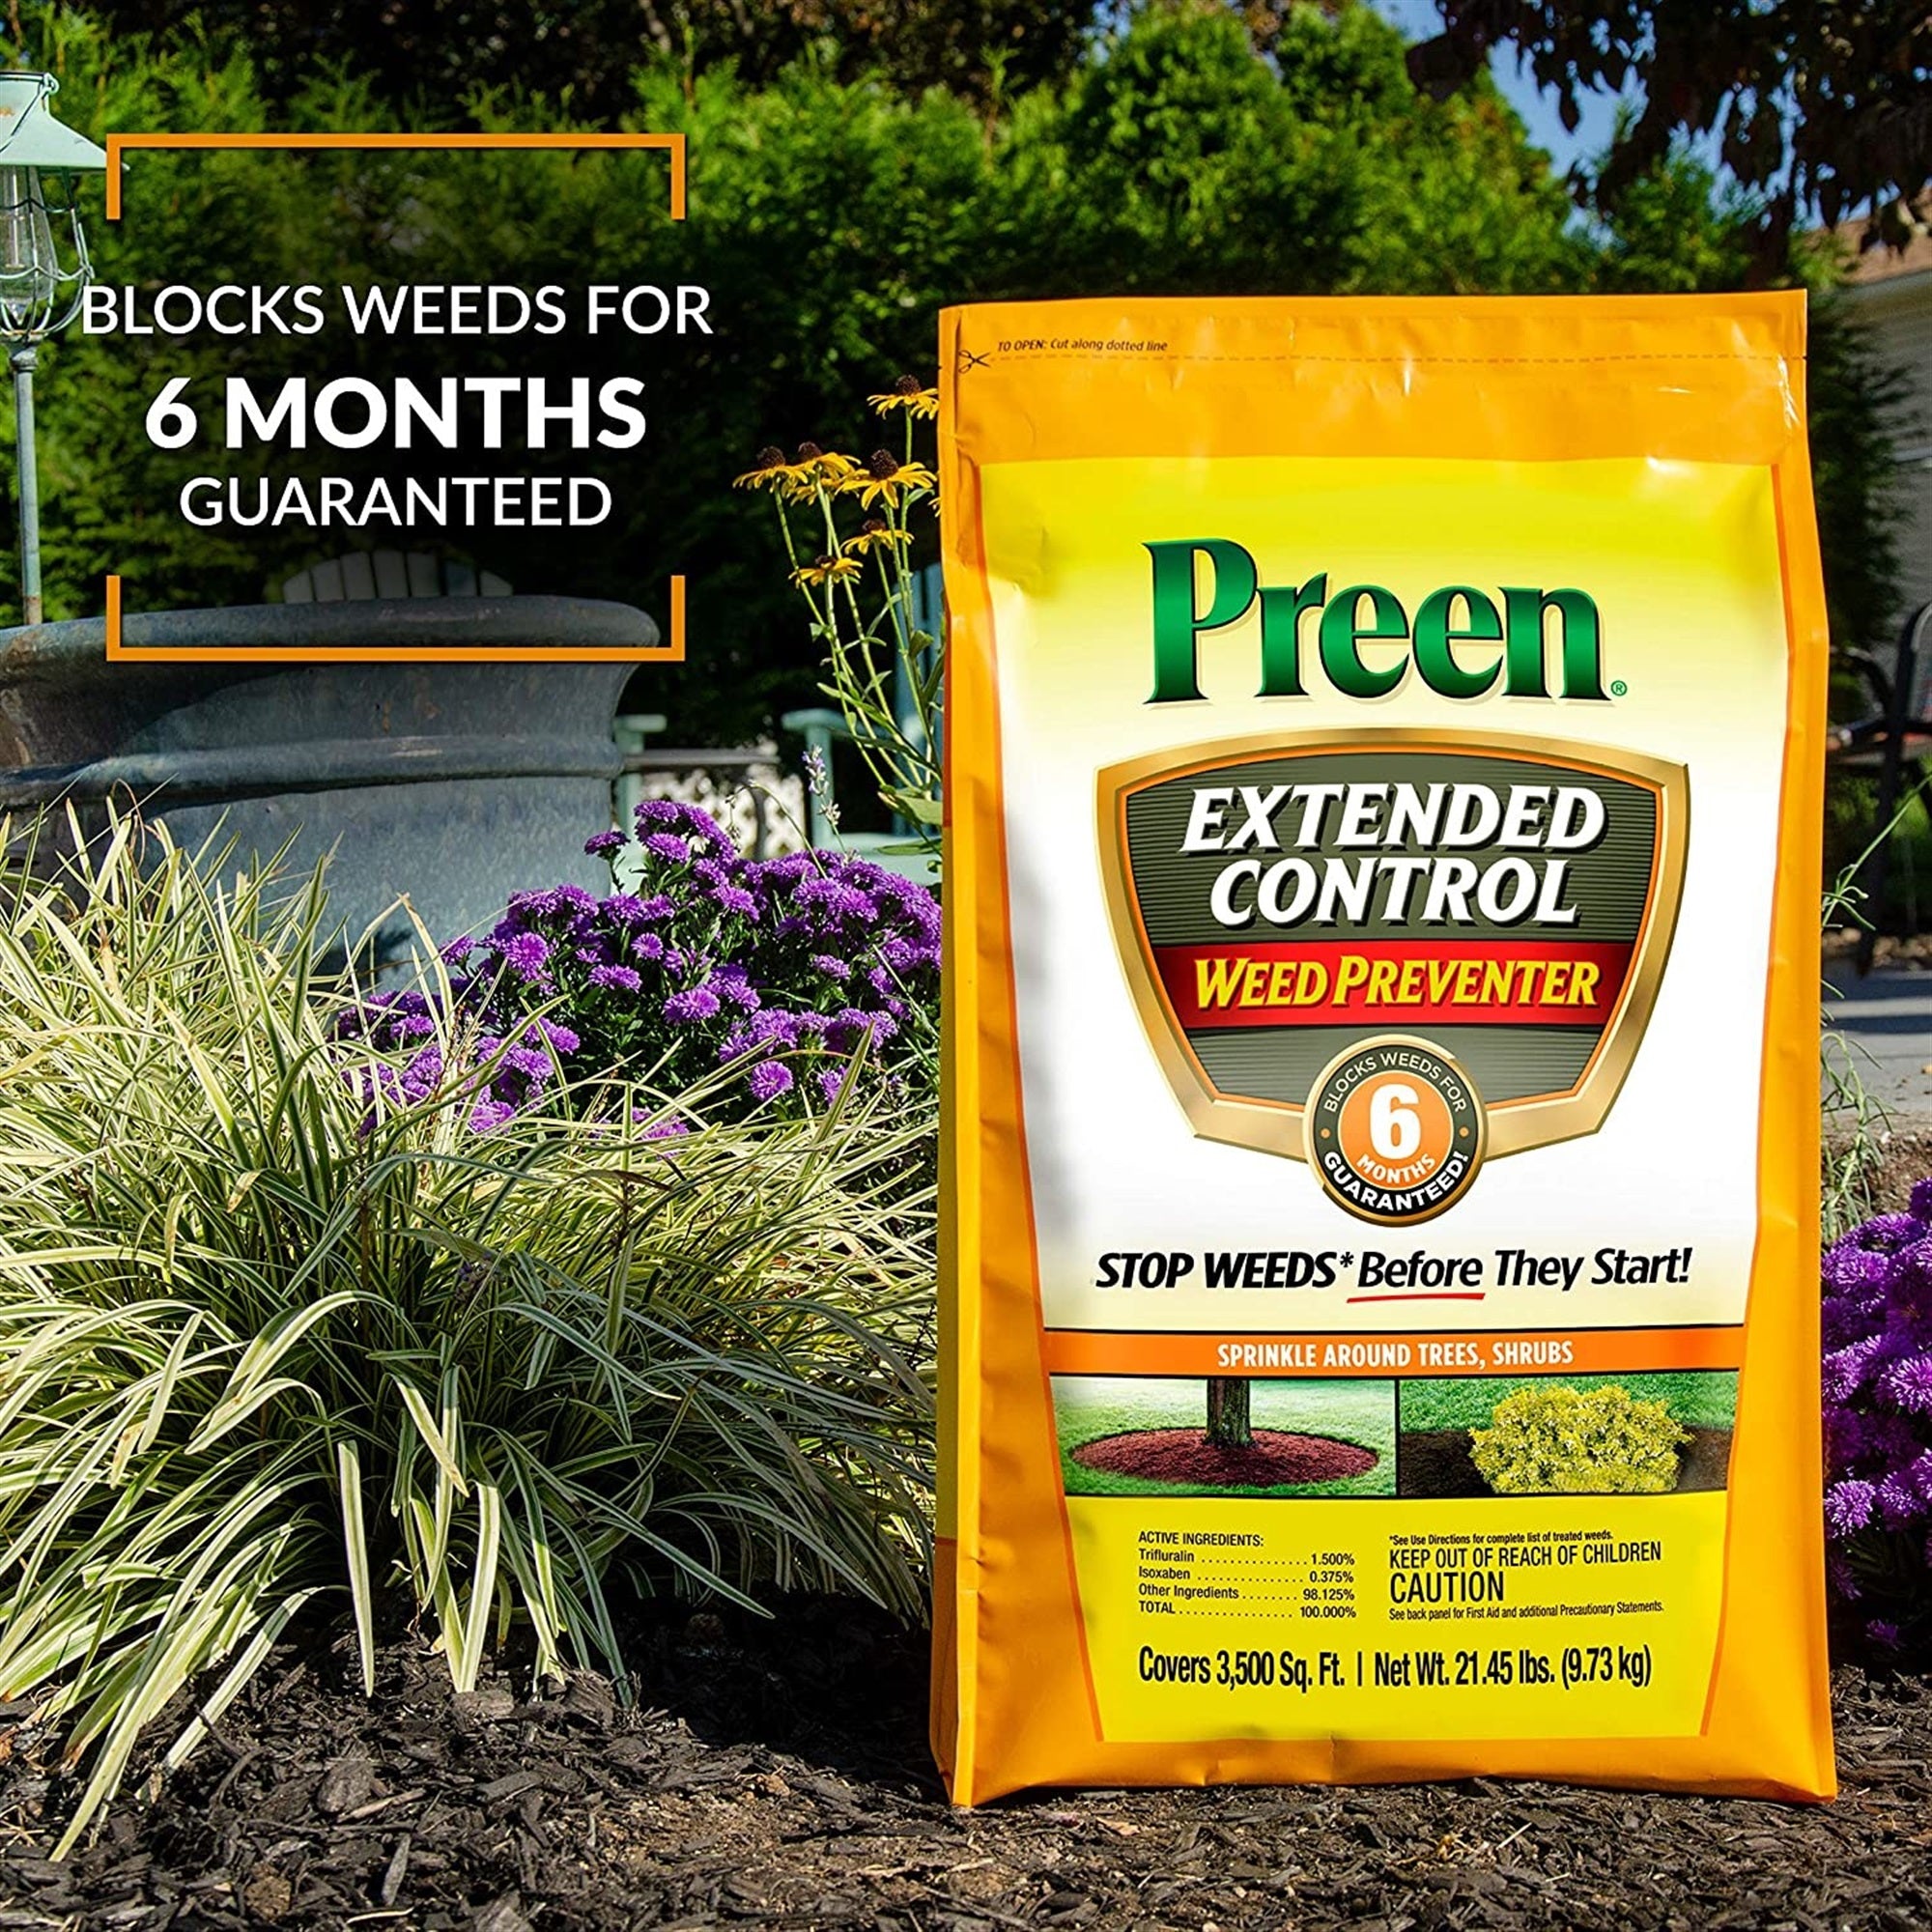 Preen Extended Control Weed Prevent, 21.45 lb bag covers 3,500 sq ft